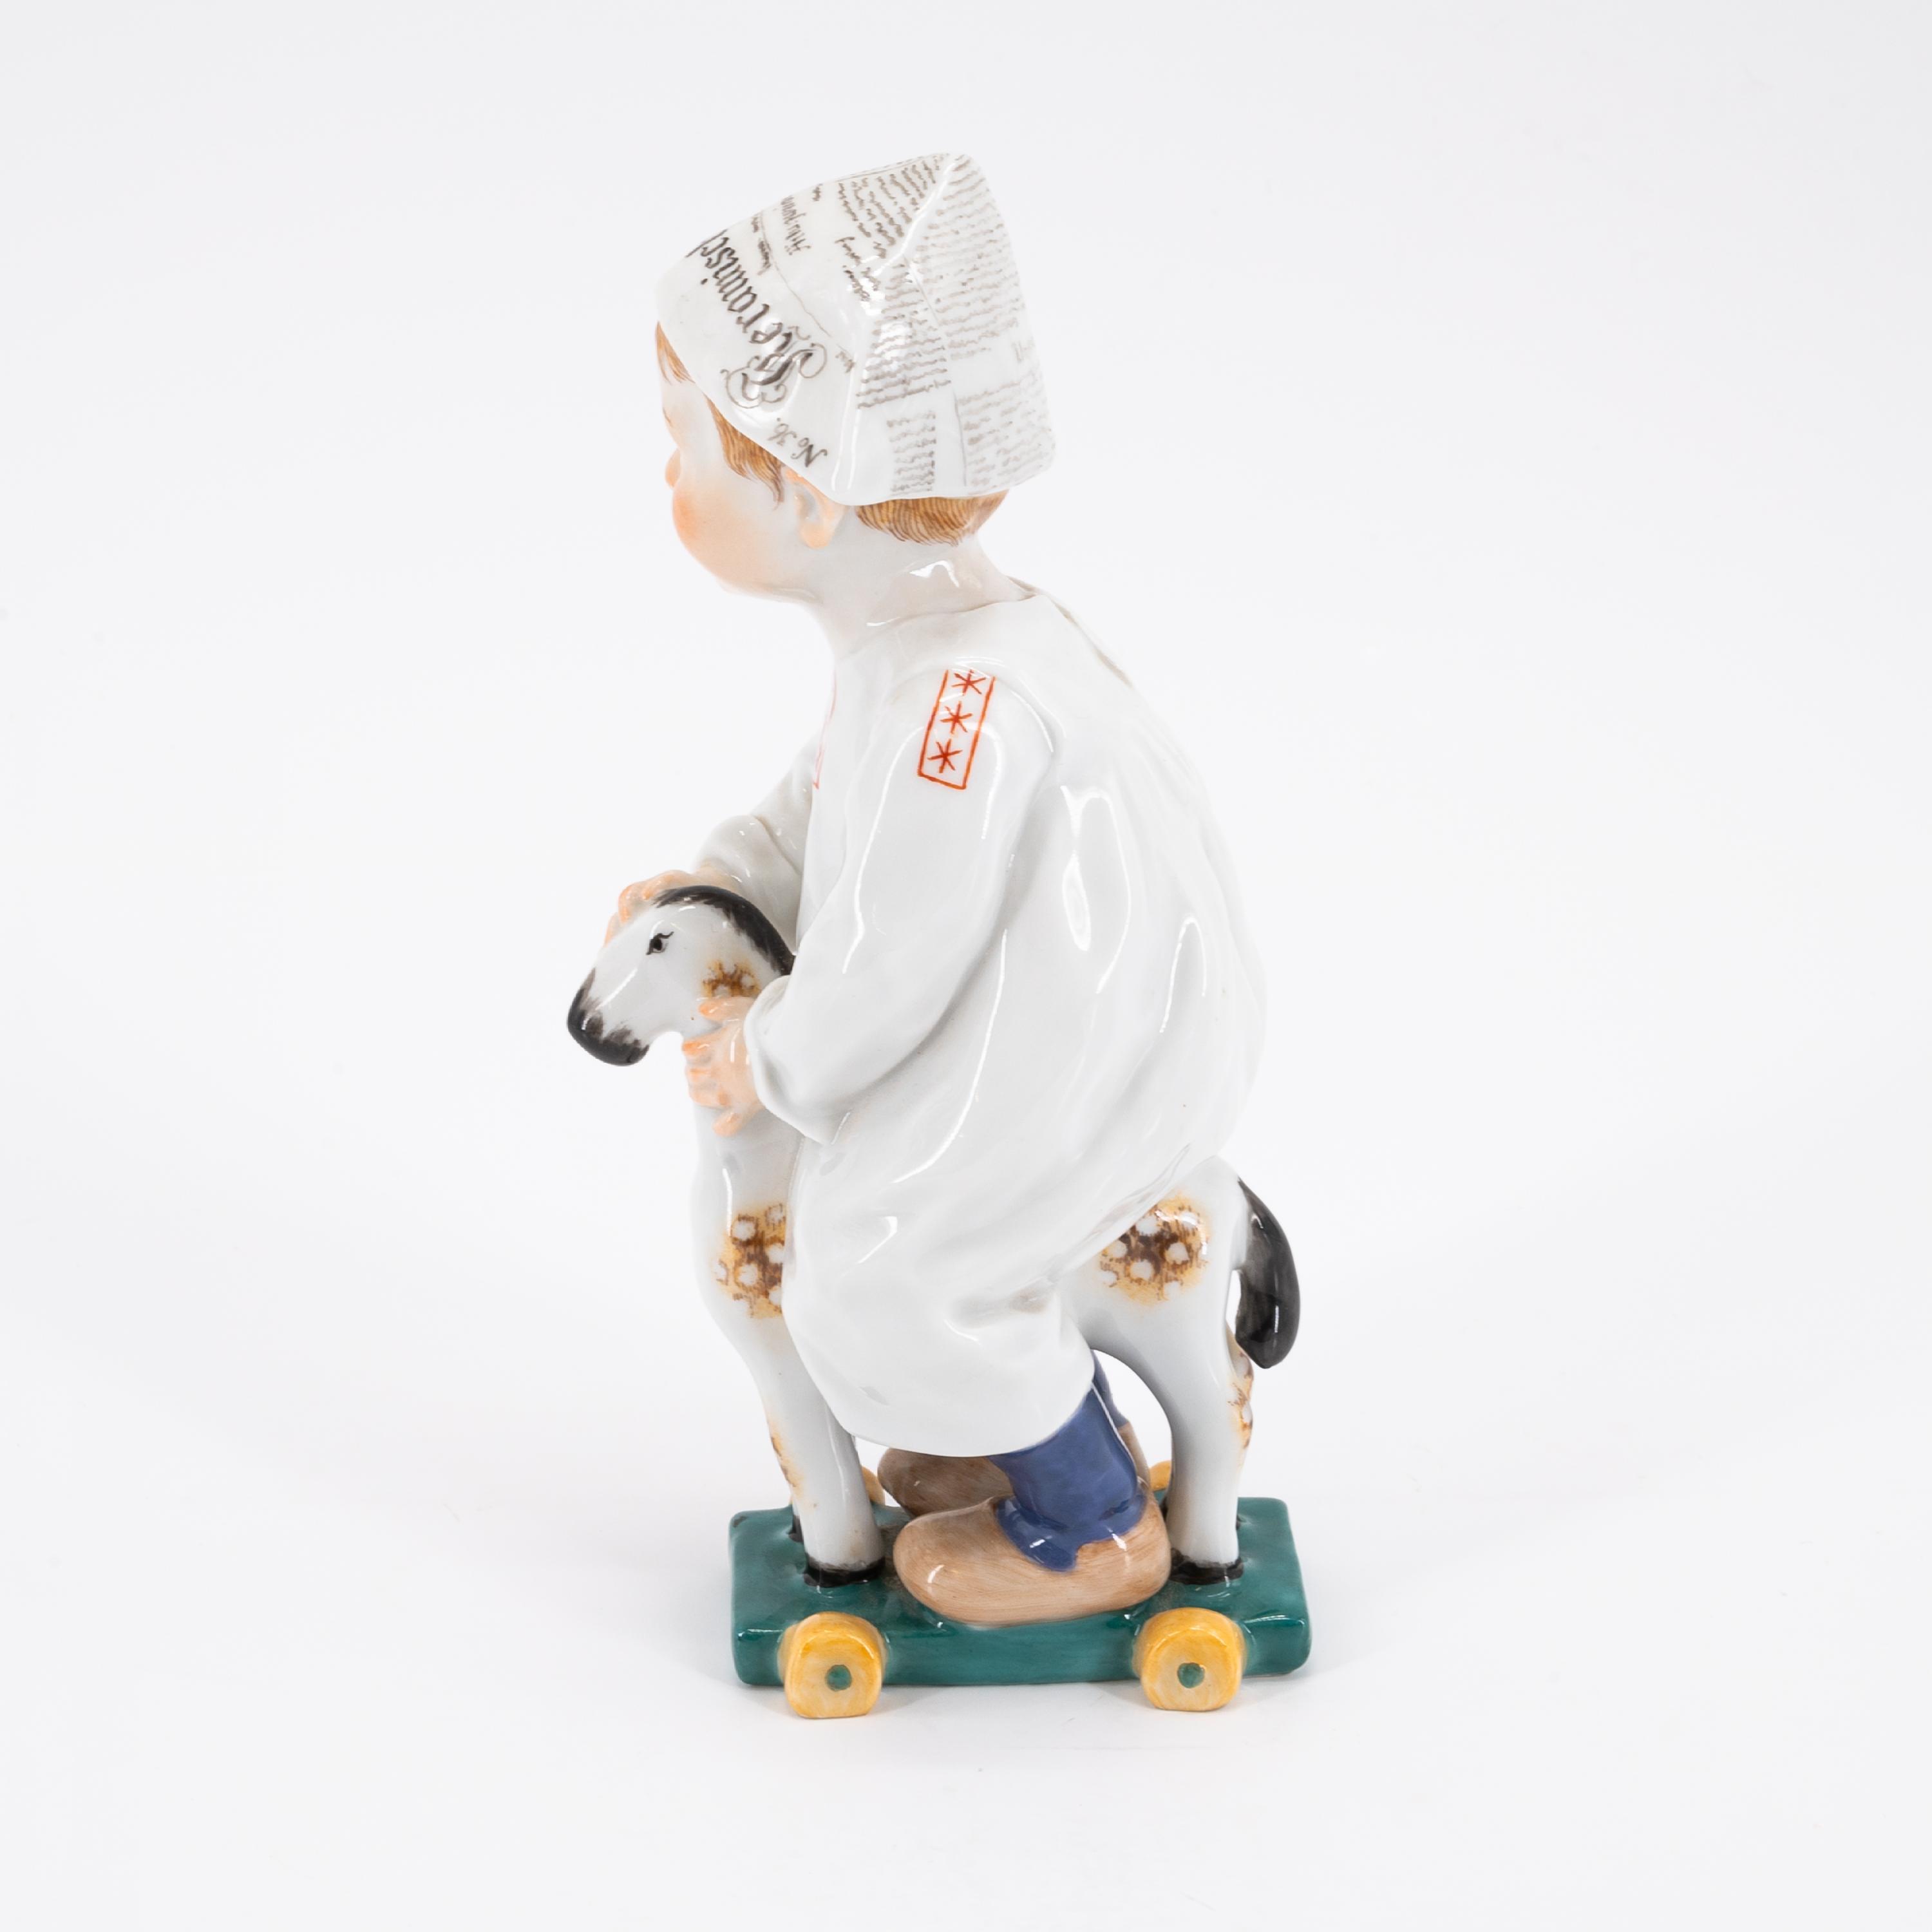 SMALL PORCELAIN BOY WITH NEWSPAPER HAT ON A LITTLE WOODEN HORSE - Image 2 of 5